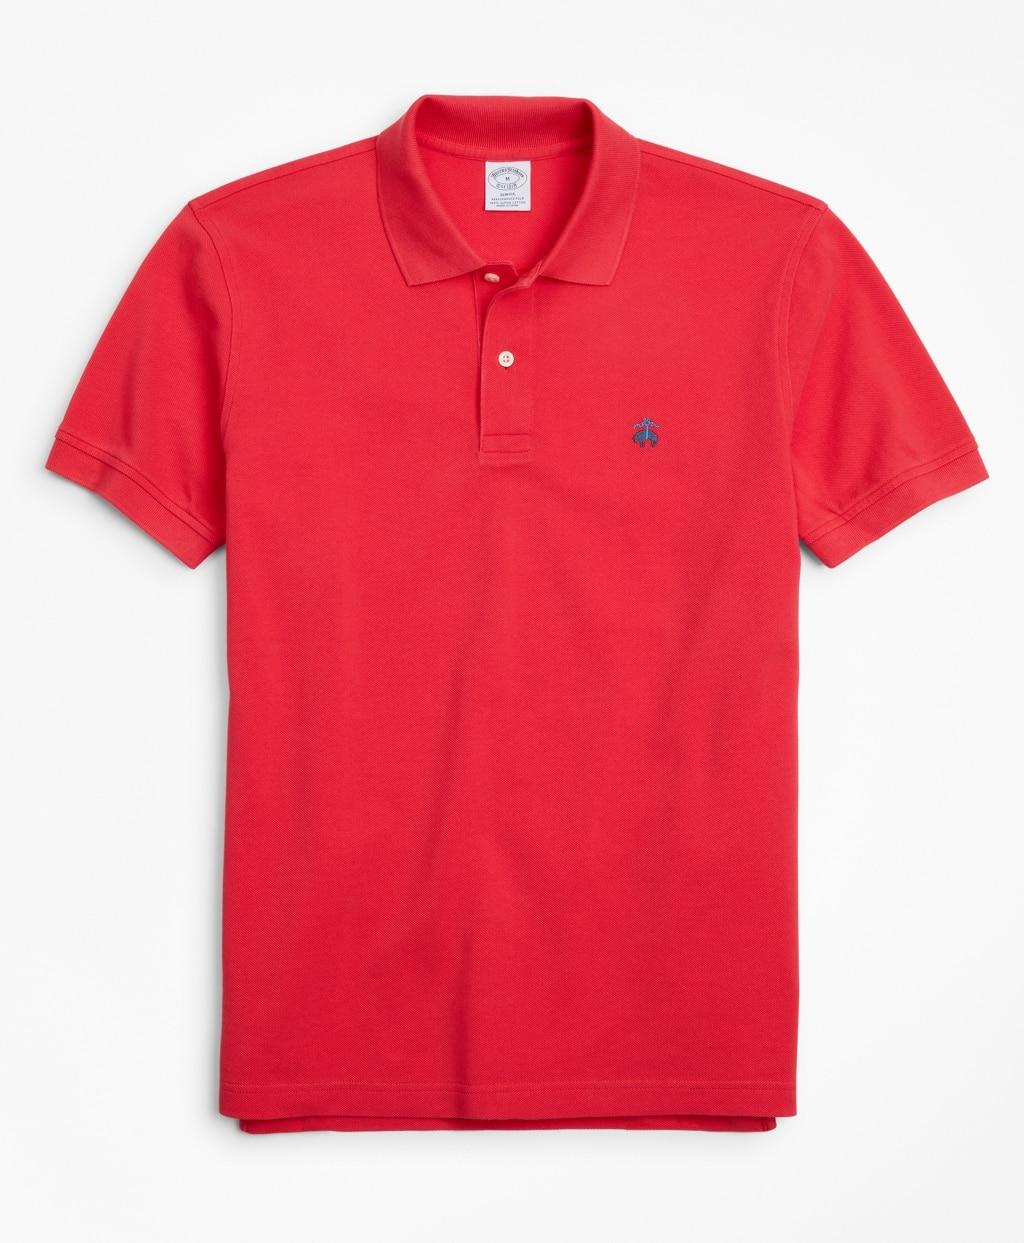 Brooks Brothers Slim Fit Supima Cotton Performance Polo Shirt in Bright ...